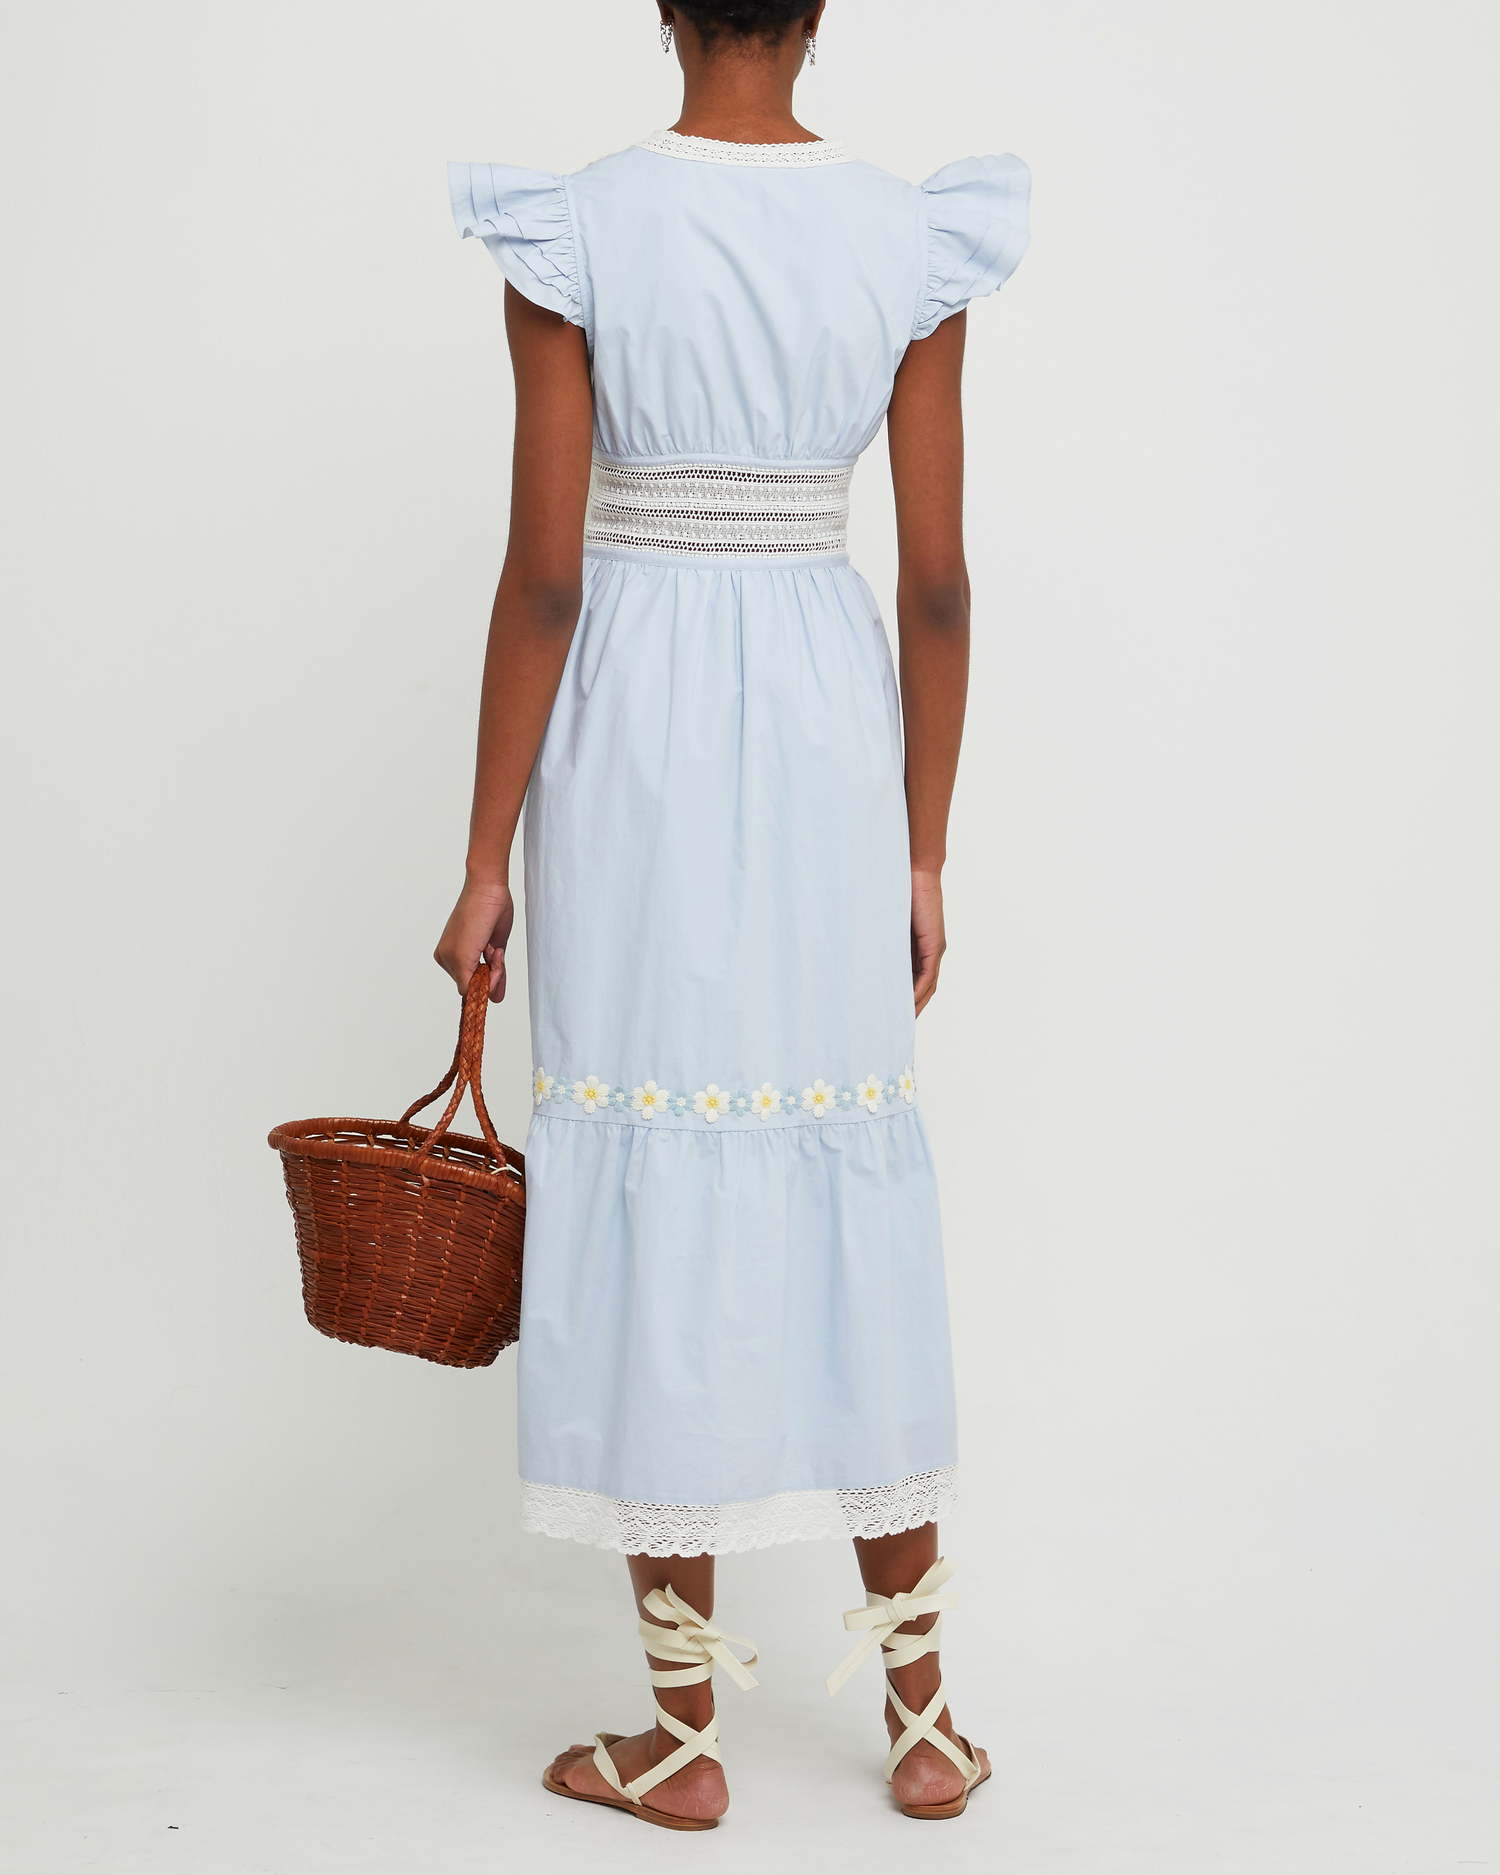 Second image of Holly Cotton Dress, a blue midi dress, lace detail, floral embroidered, pocket, sheer, V-neck